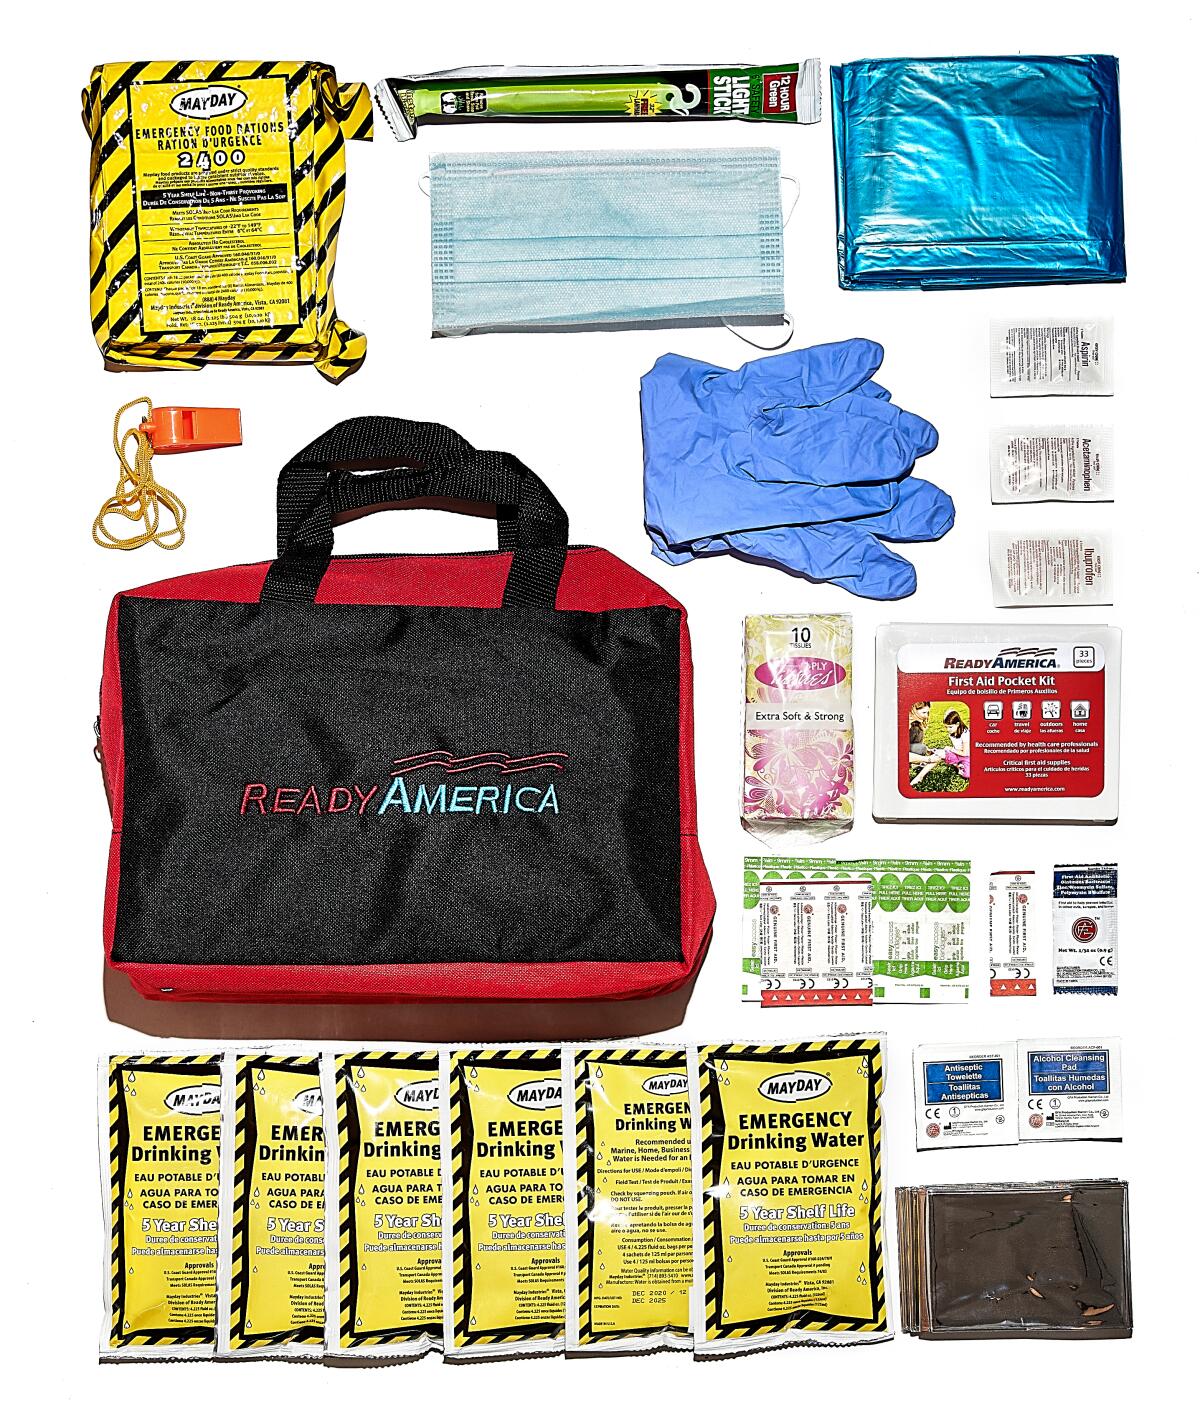 How 4 premade earthquake kits compare on supplies, price - Los